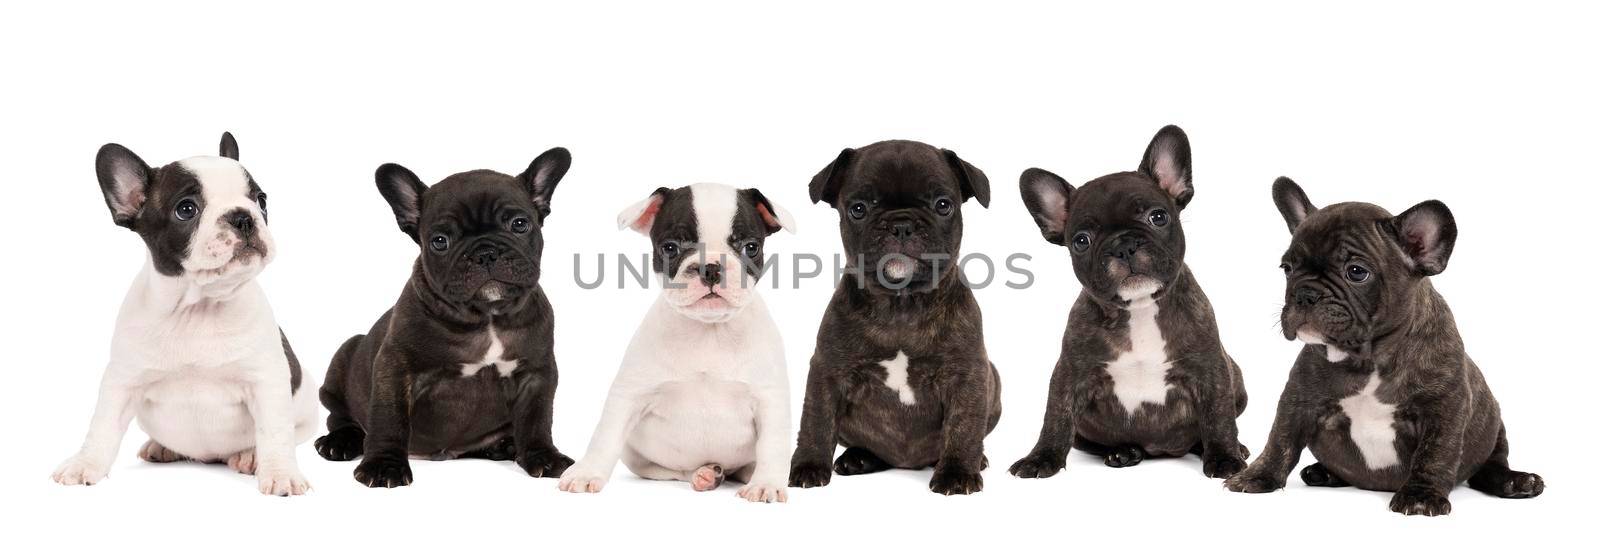 Studio shot of a litter adorable French bulldog puppies sitting on isolated white background looking at the camera with copy space by LeoniekvanderVliet